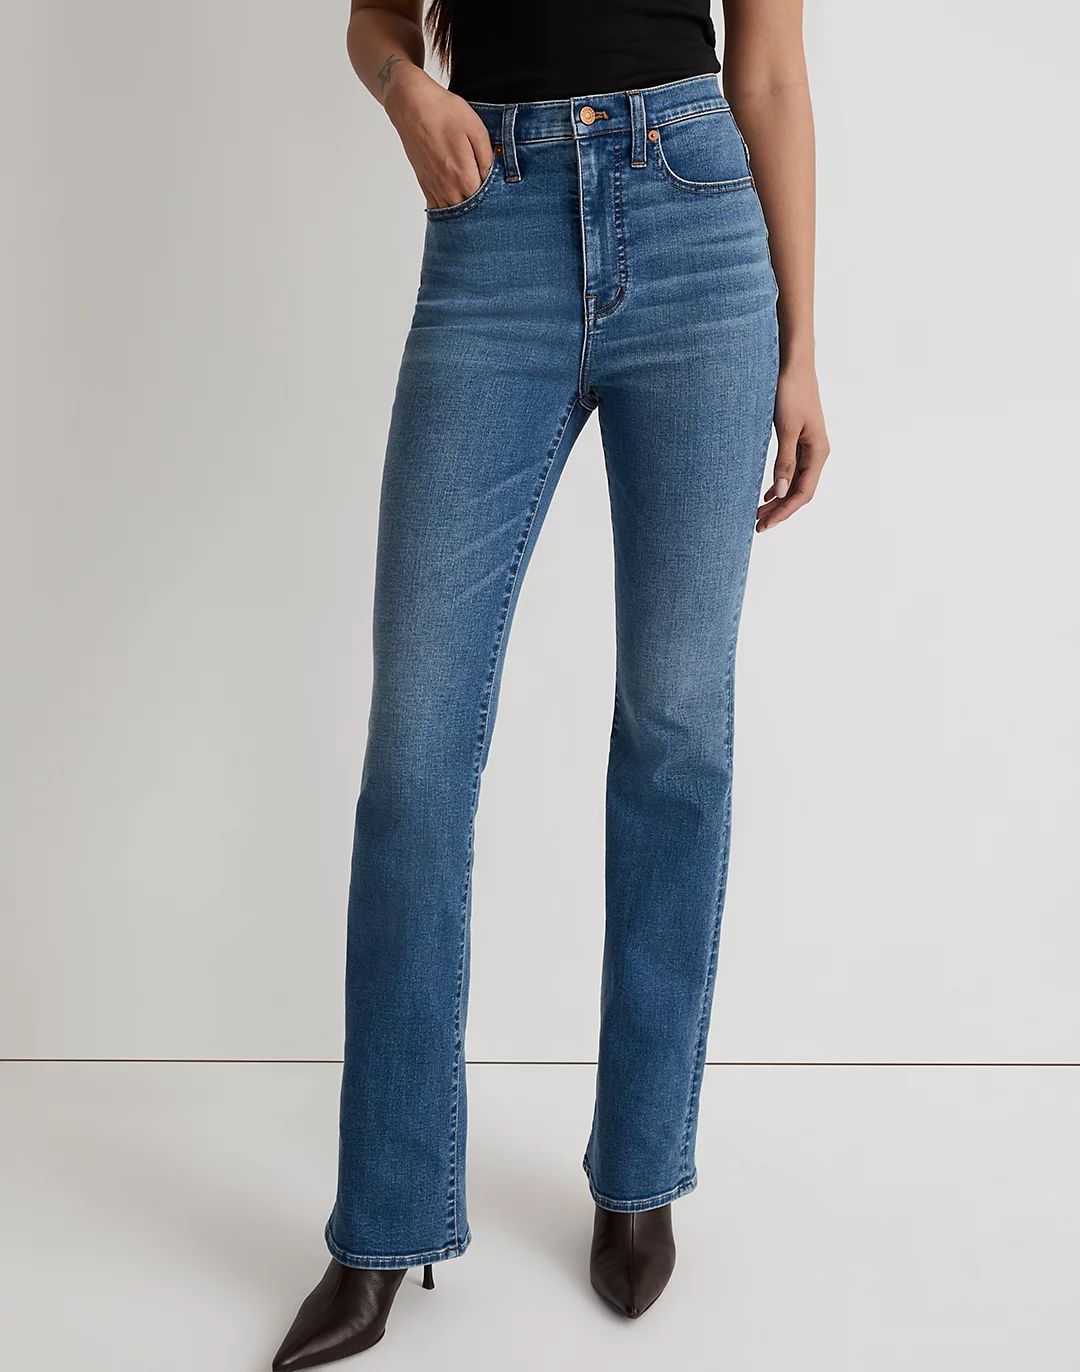 Skinny Flare Jeans in Elevere Wash | Madewell